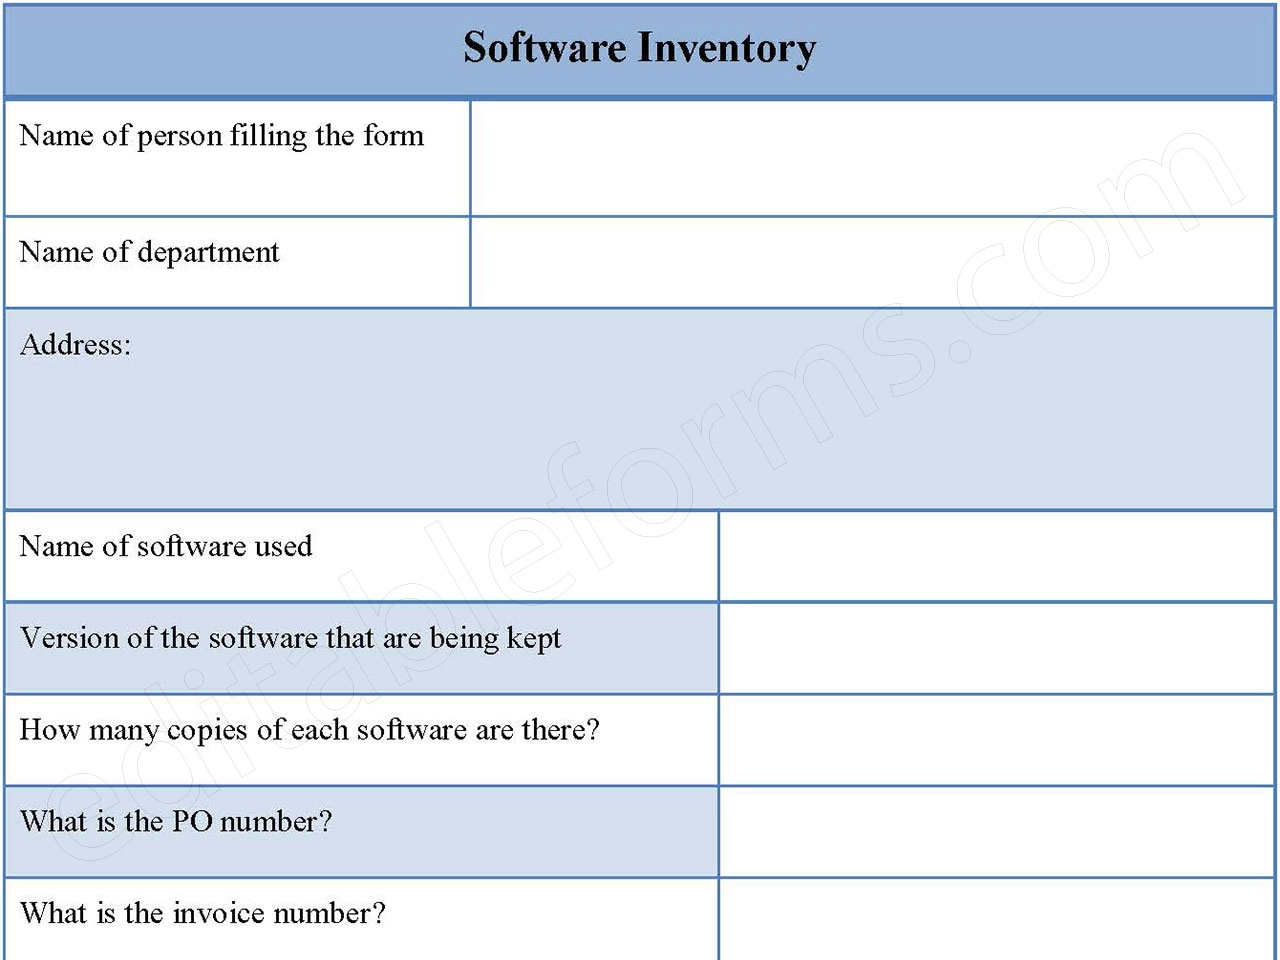 Software Inventory Form